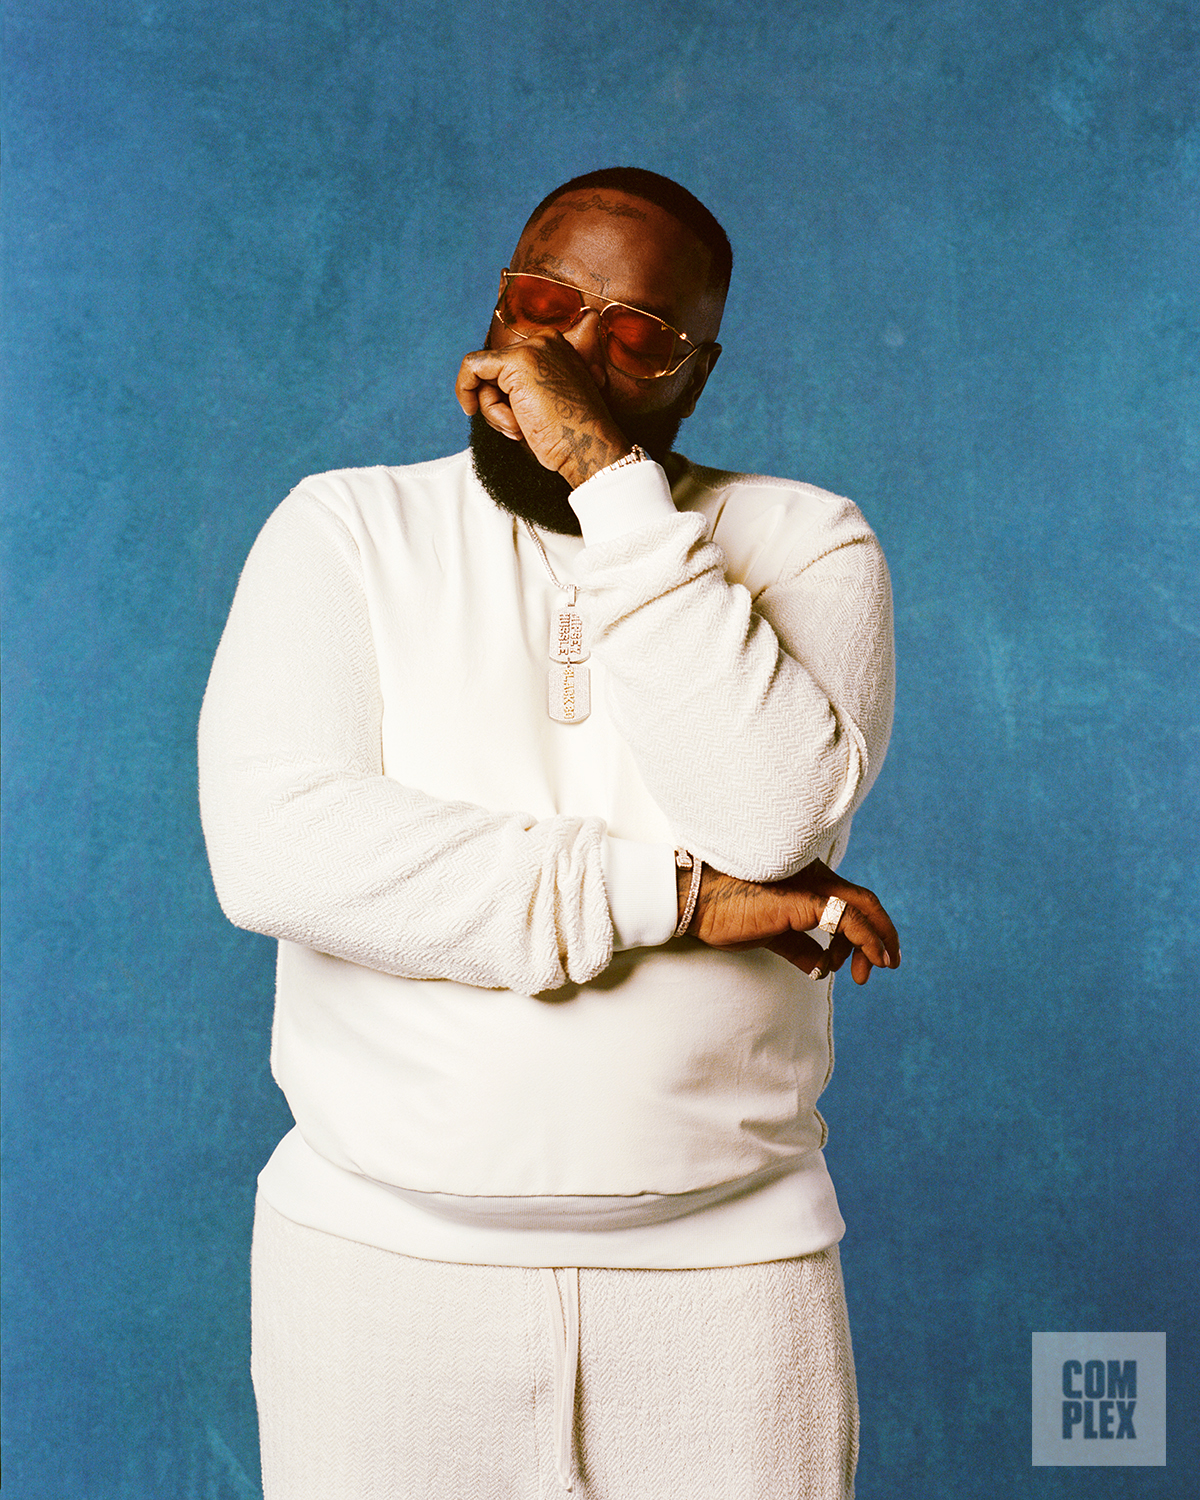 A Luxurious Drive Through New York With Rick Ross